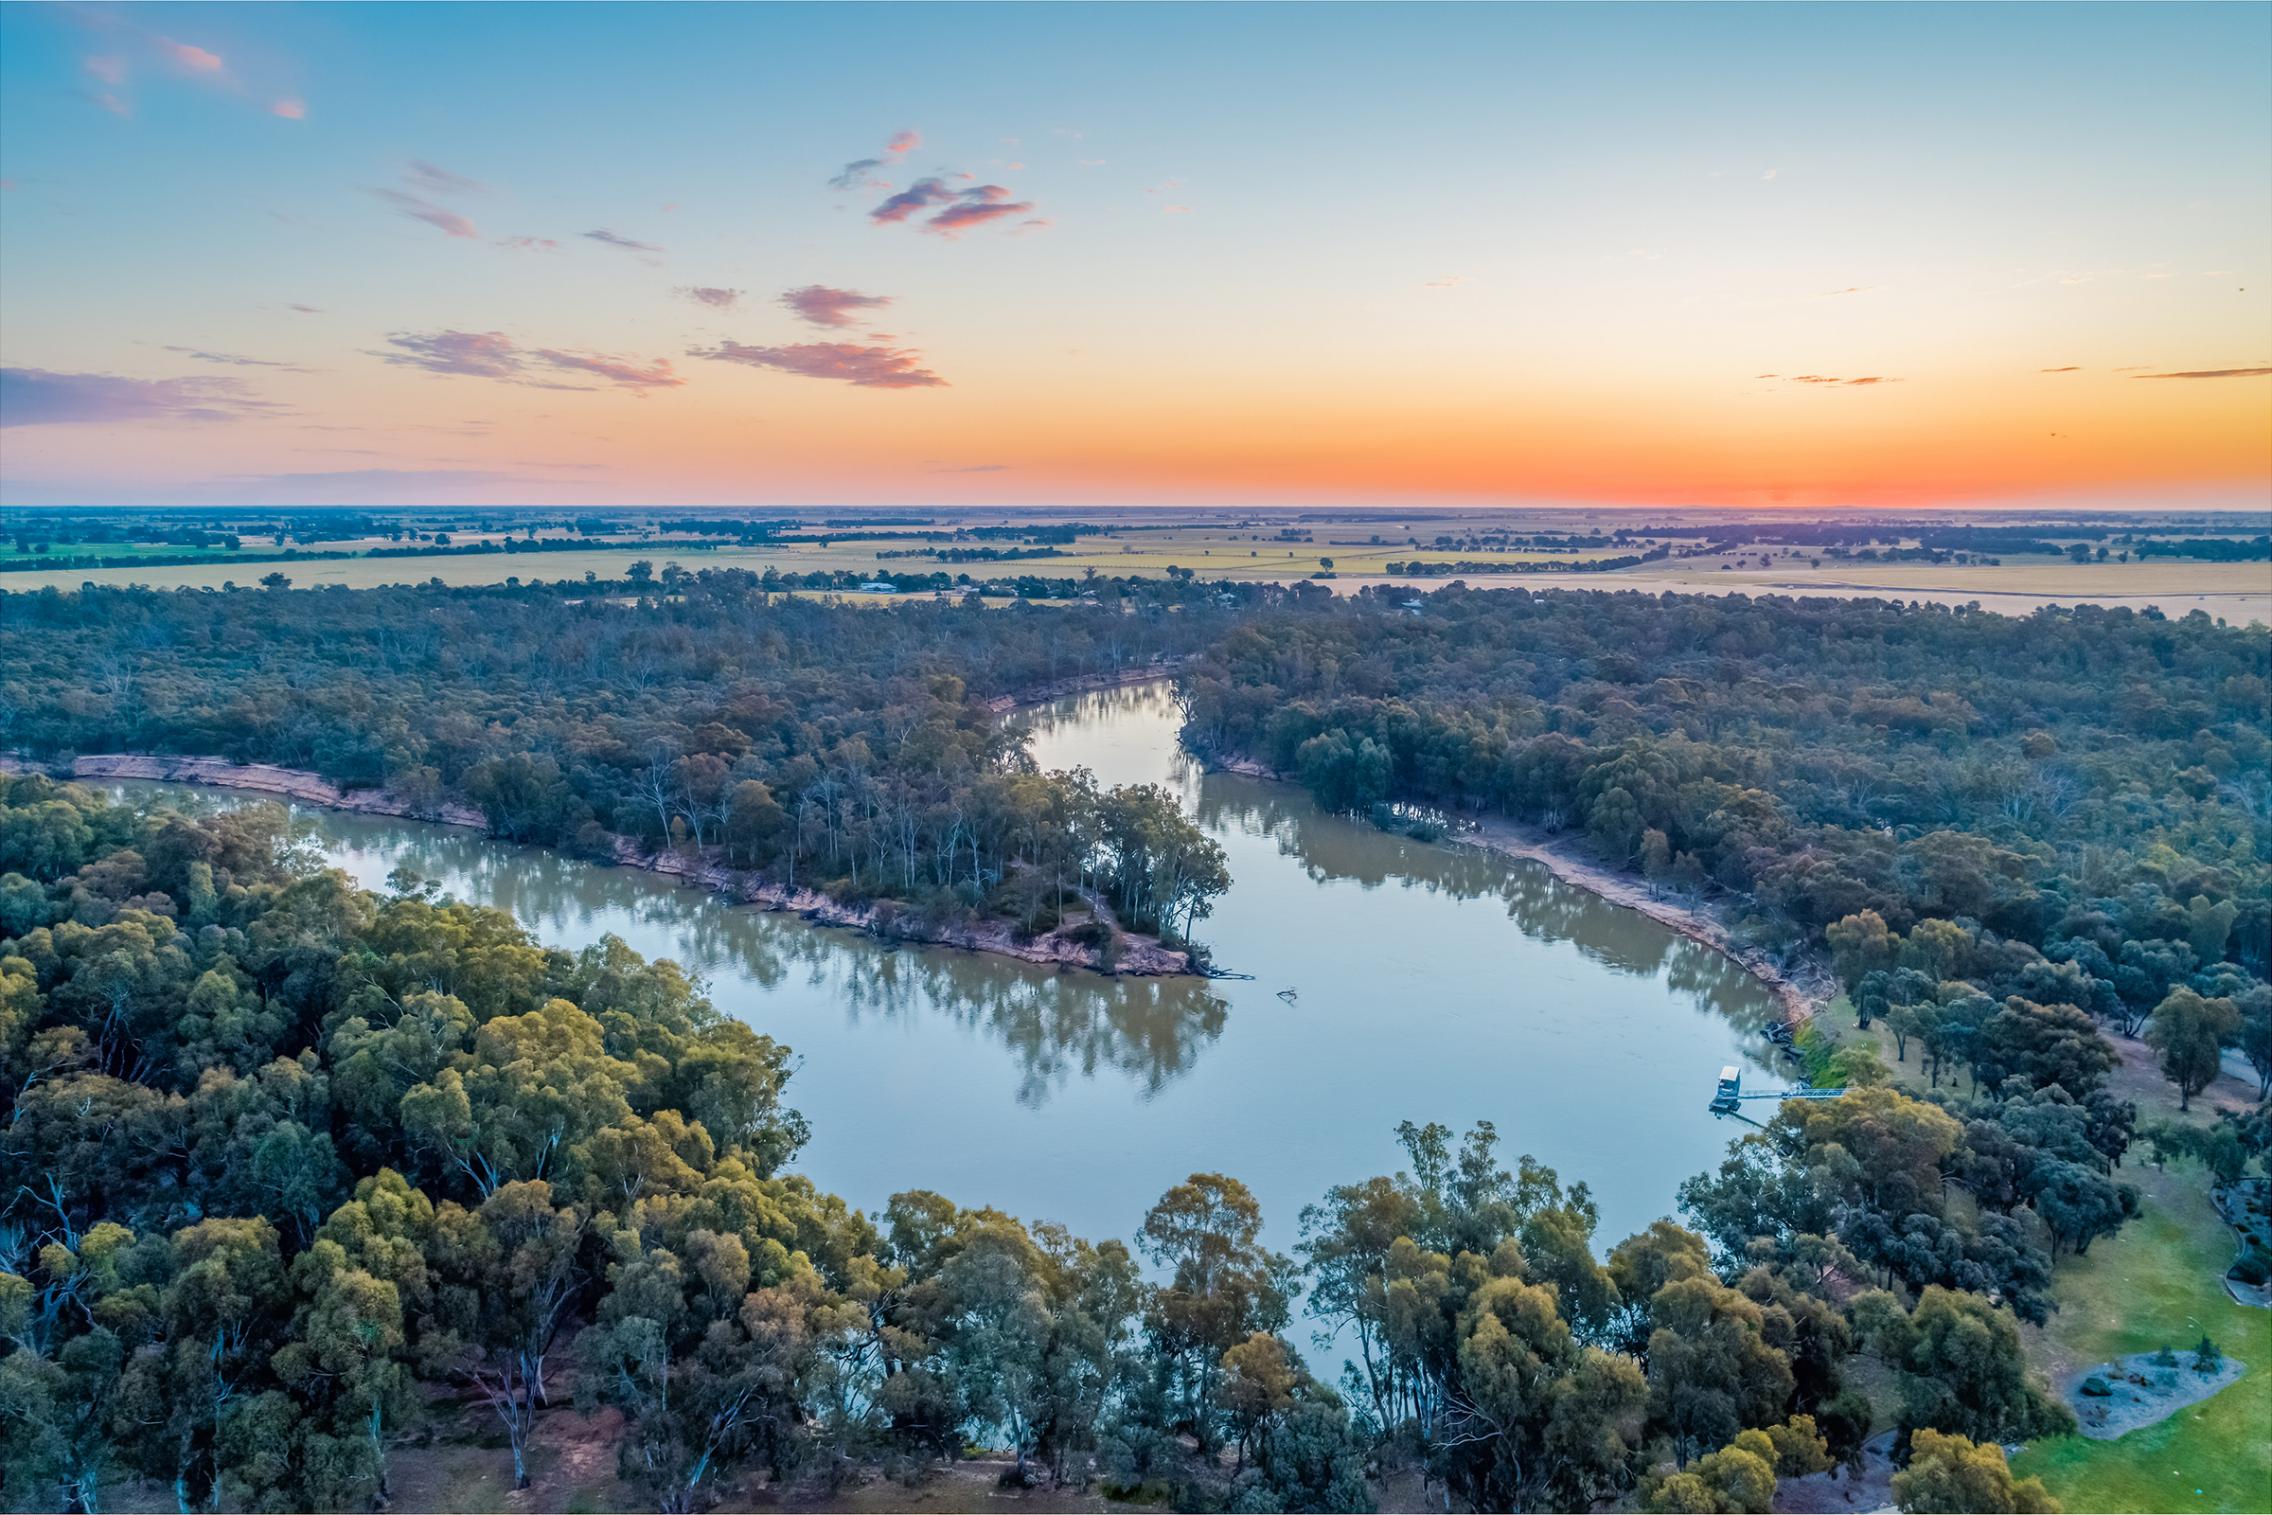 Murray river aerial shot. Image credit to iStock.